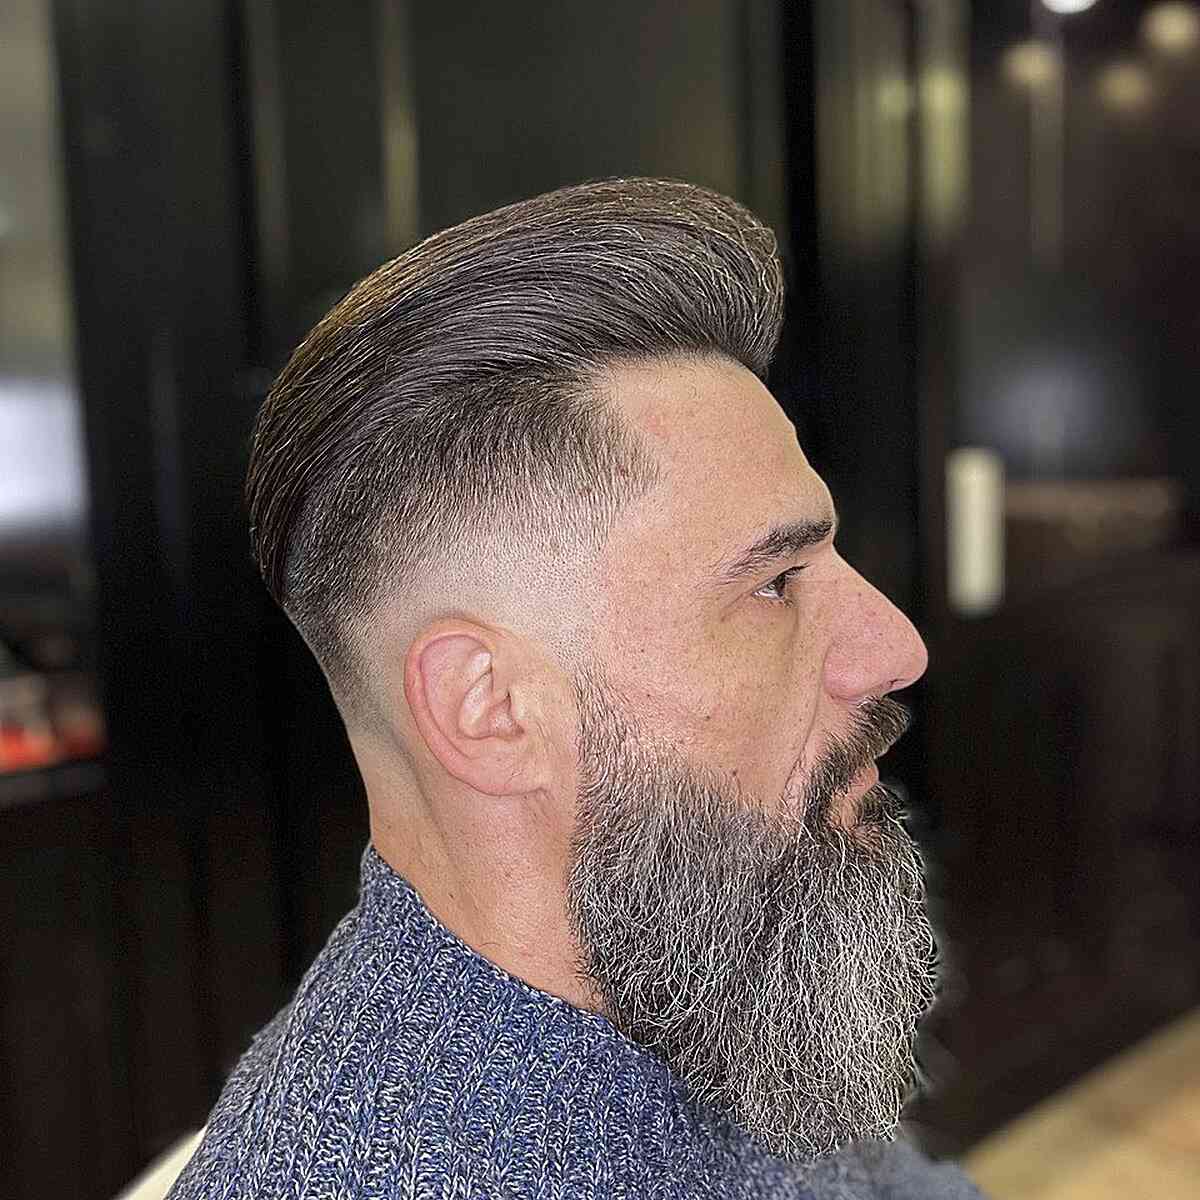 Straight Brushed-Back Pomp with a Skin Fade and Long Beard